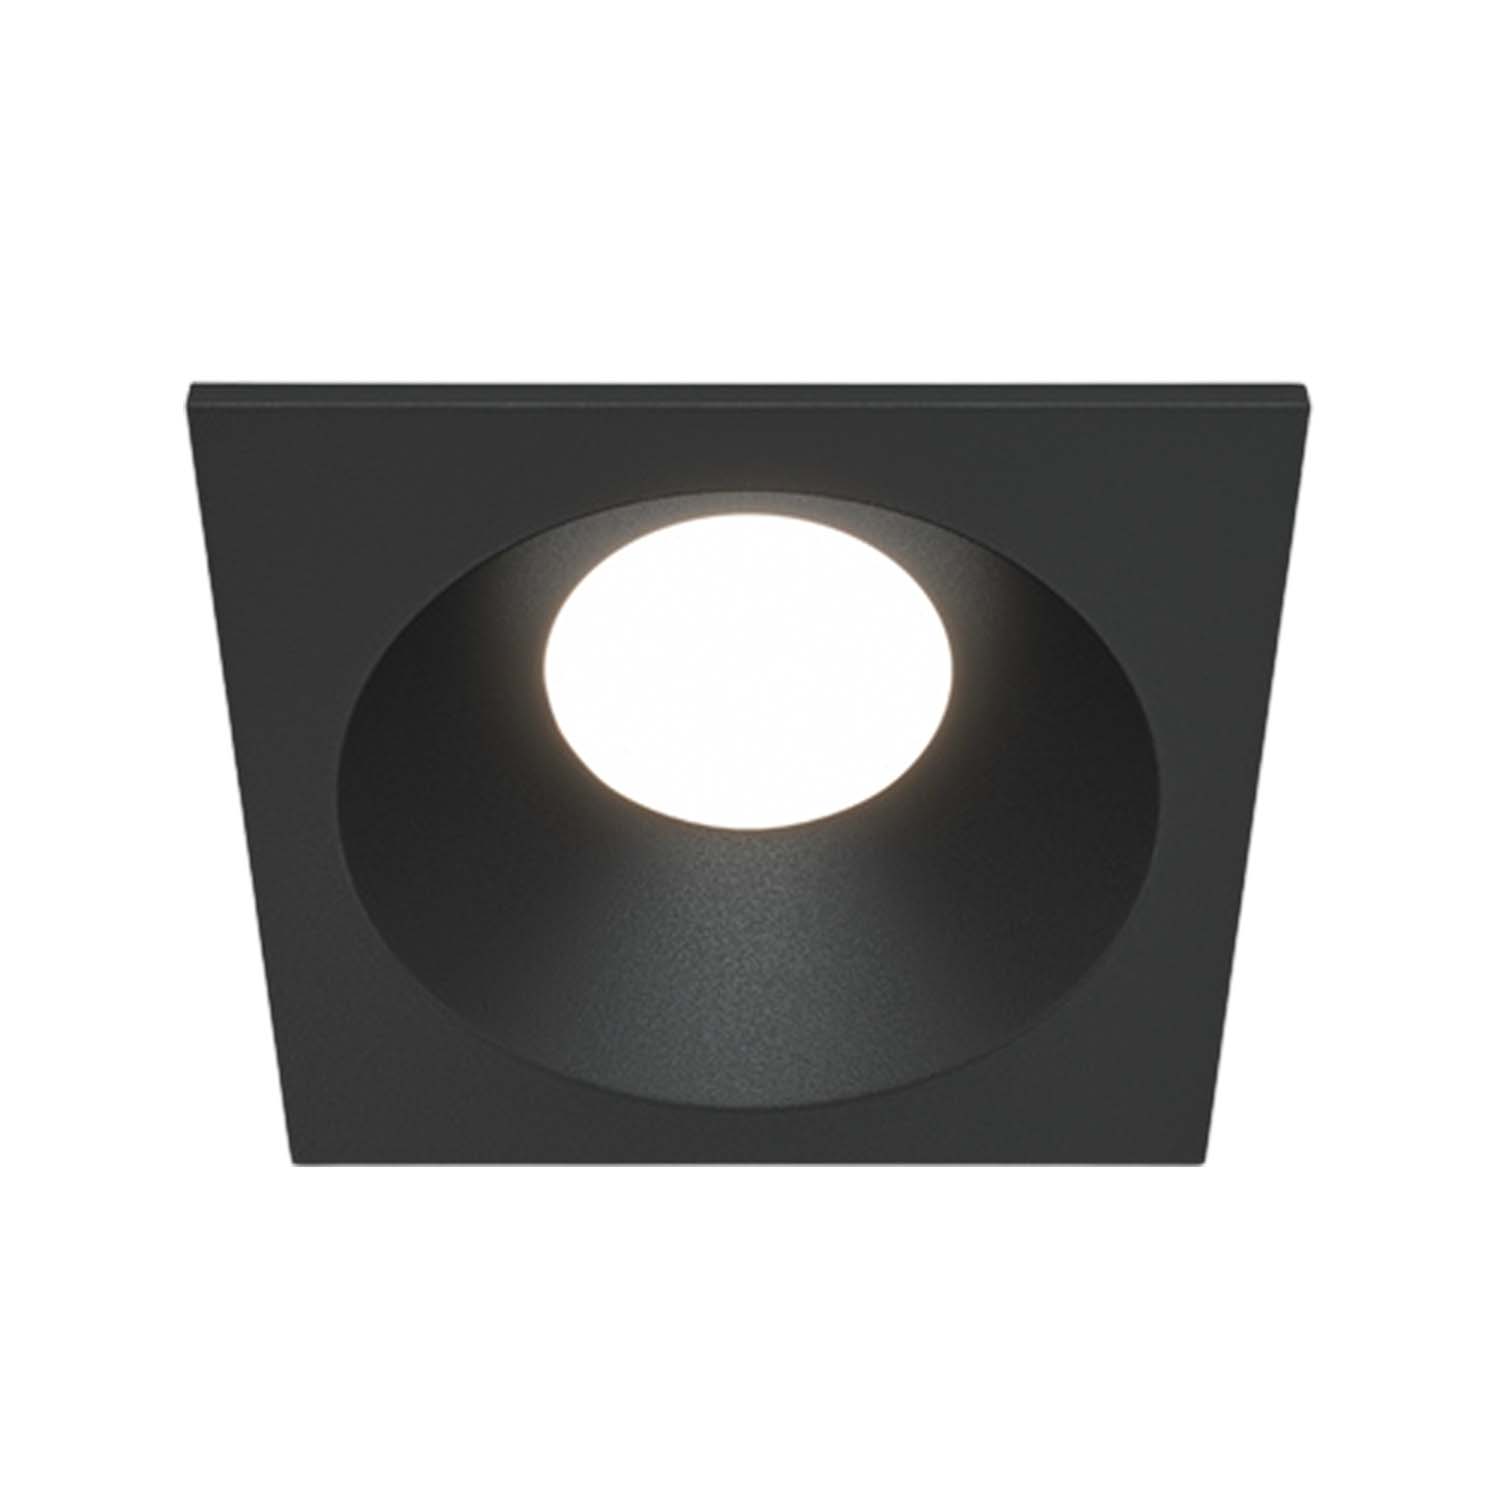 ZOOM - Waterproof outdoor square recessed spotlight, black or white, 85mm